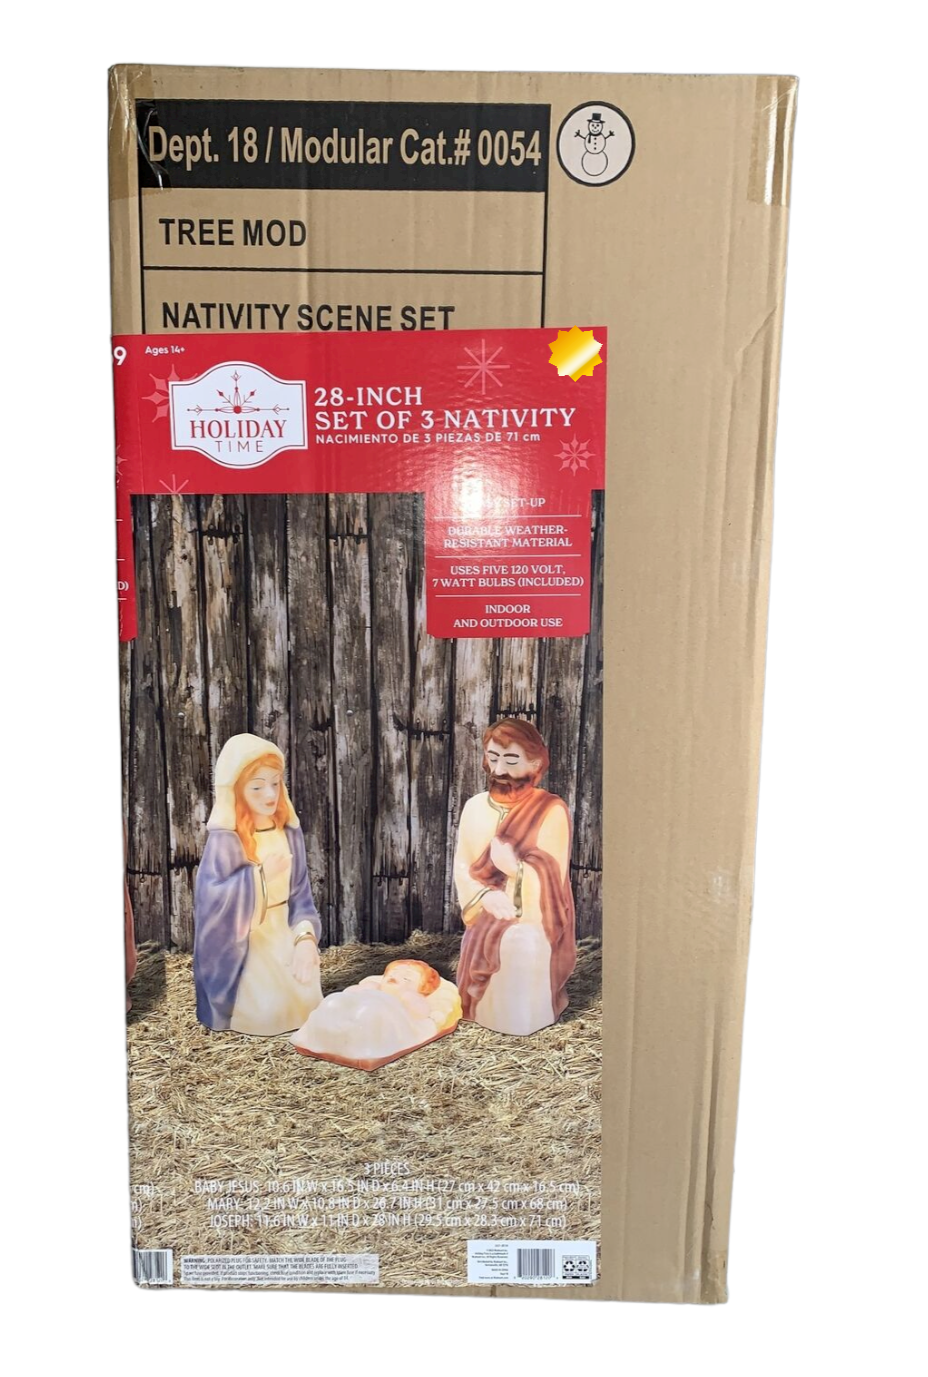 ✅IN HAND ✅Holiday Time 28" Set of 3 Nativity Scene Light